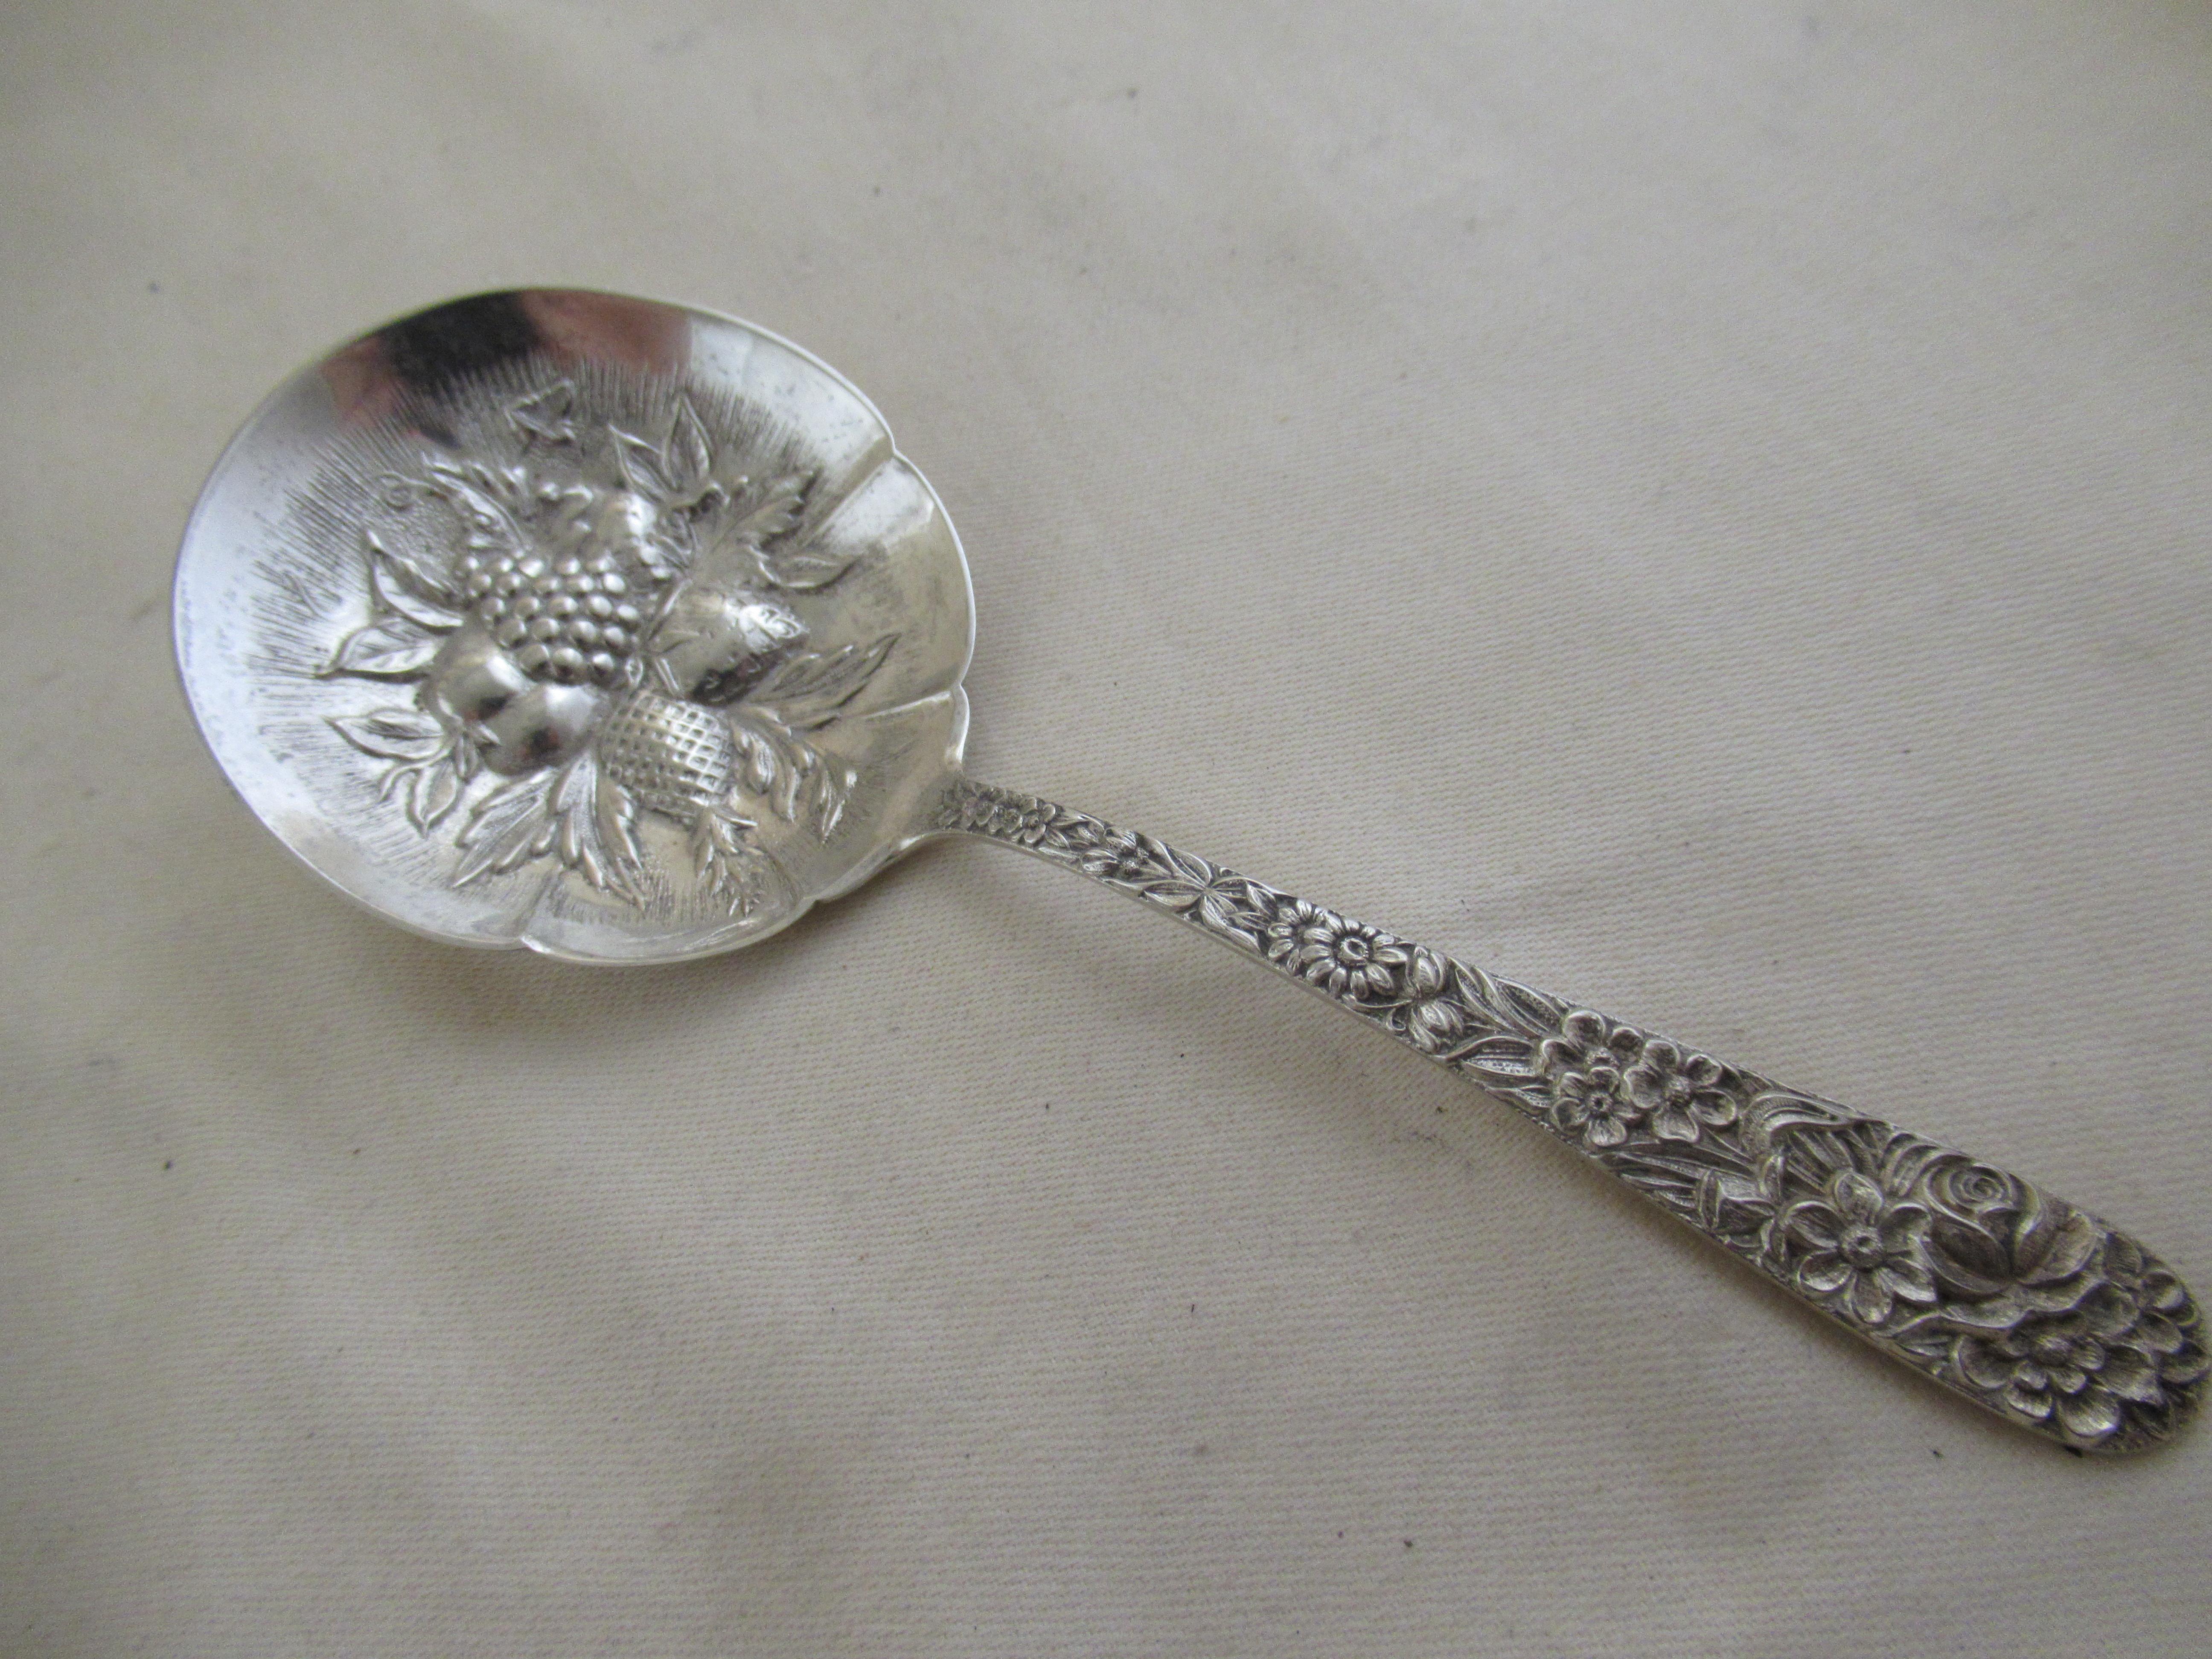 20th Century Solid Sterling Silver Conserve Dish & Spoon, Made by Kirk & Son, Maryland